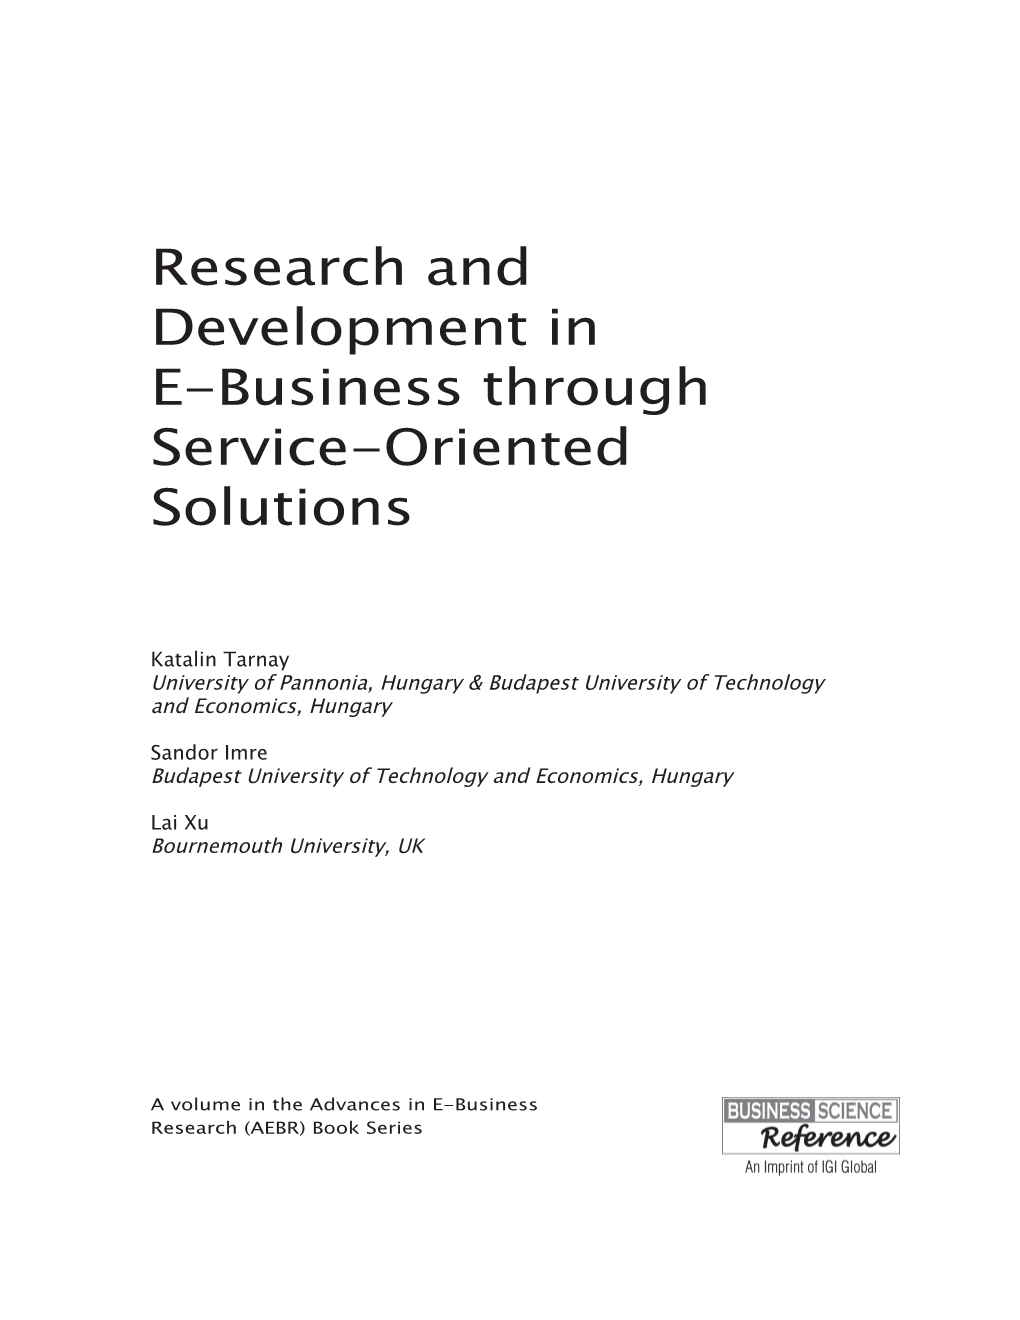 Research and Development in E-Business Through Service-Oriented Solutions